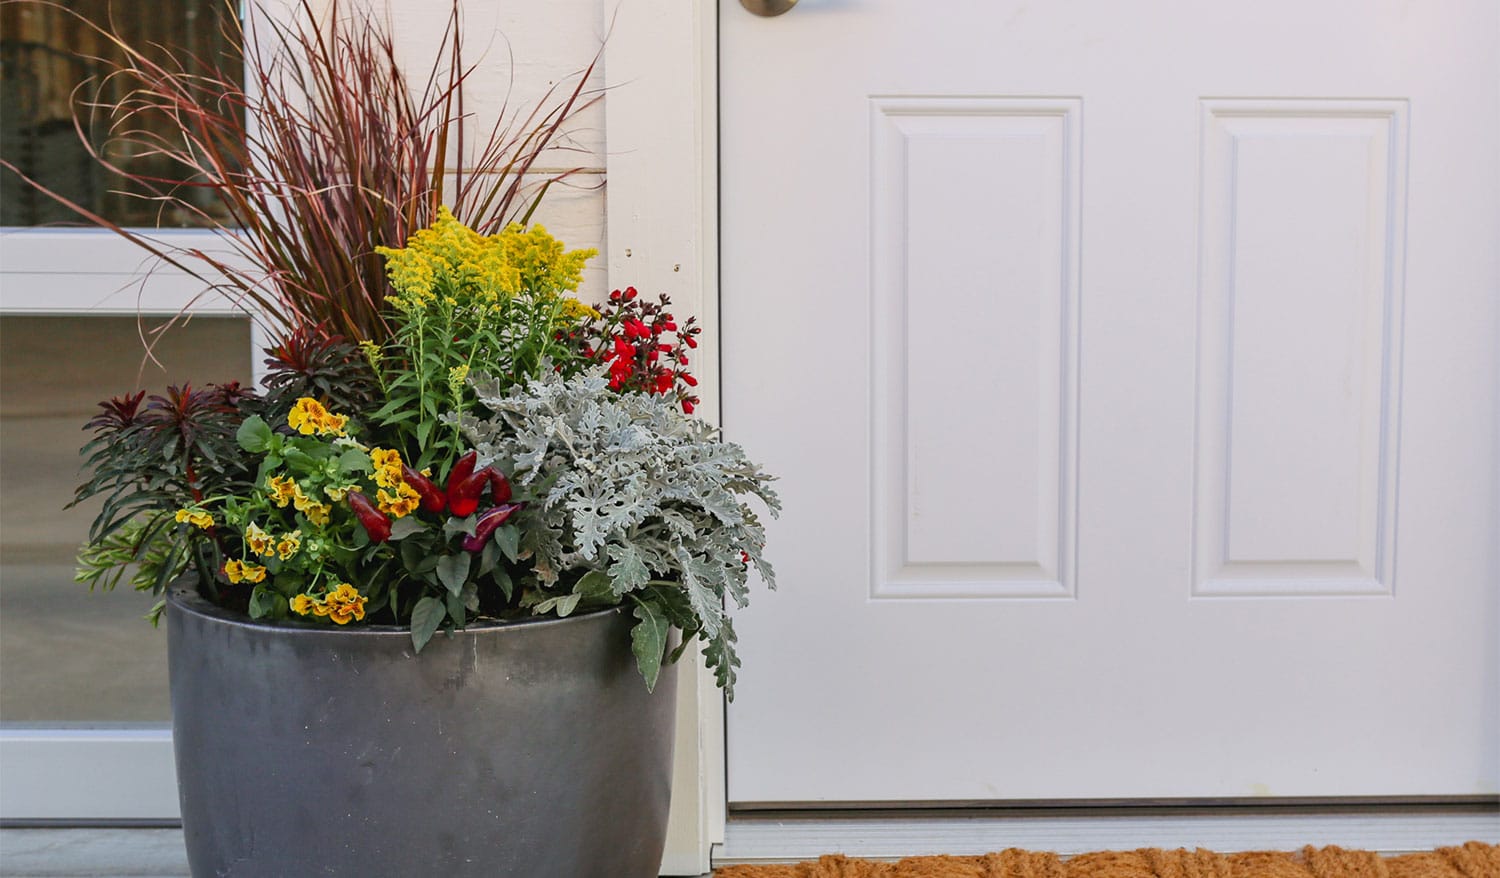 Photo of a black planter on a front porch filled with fall annuals and perennials